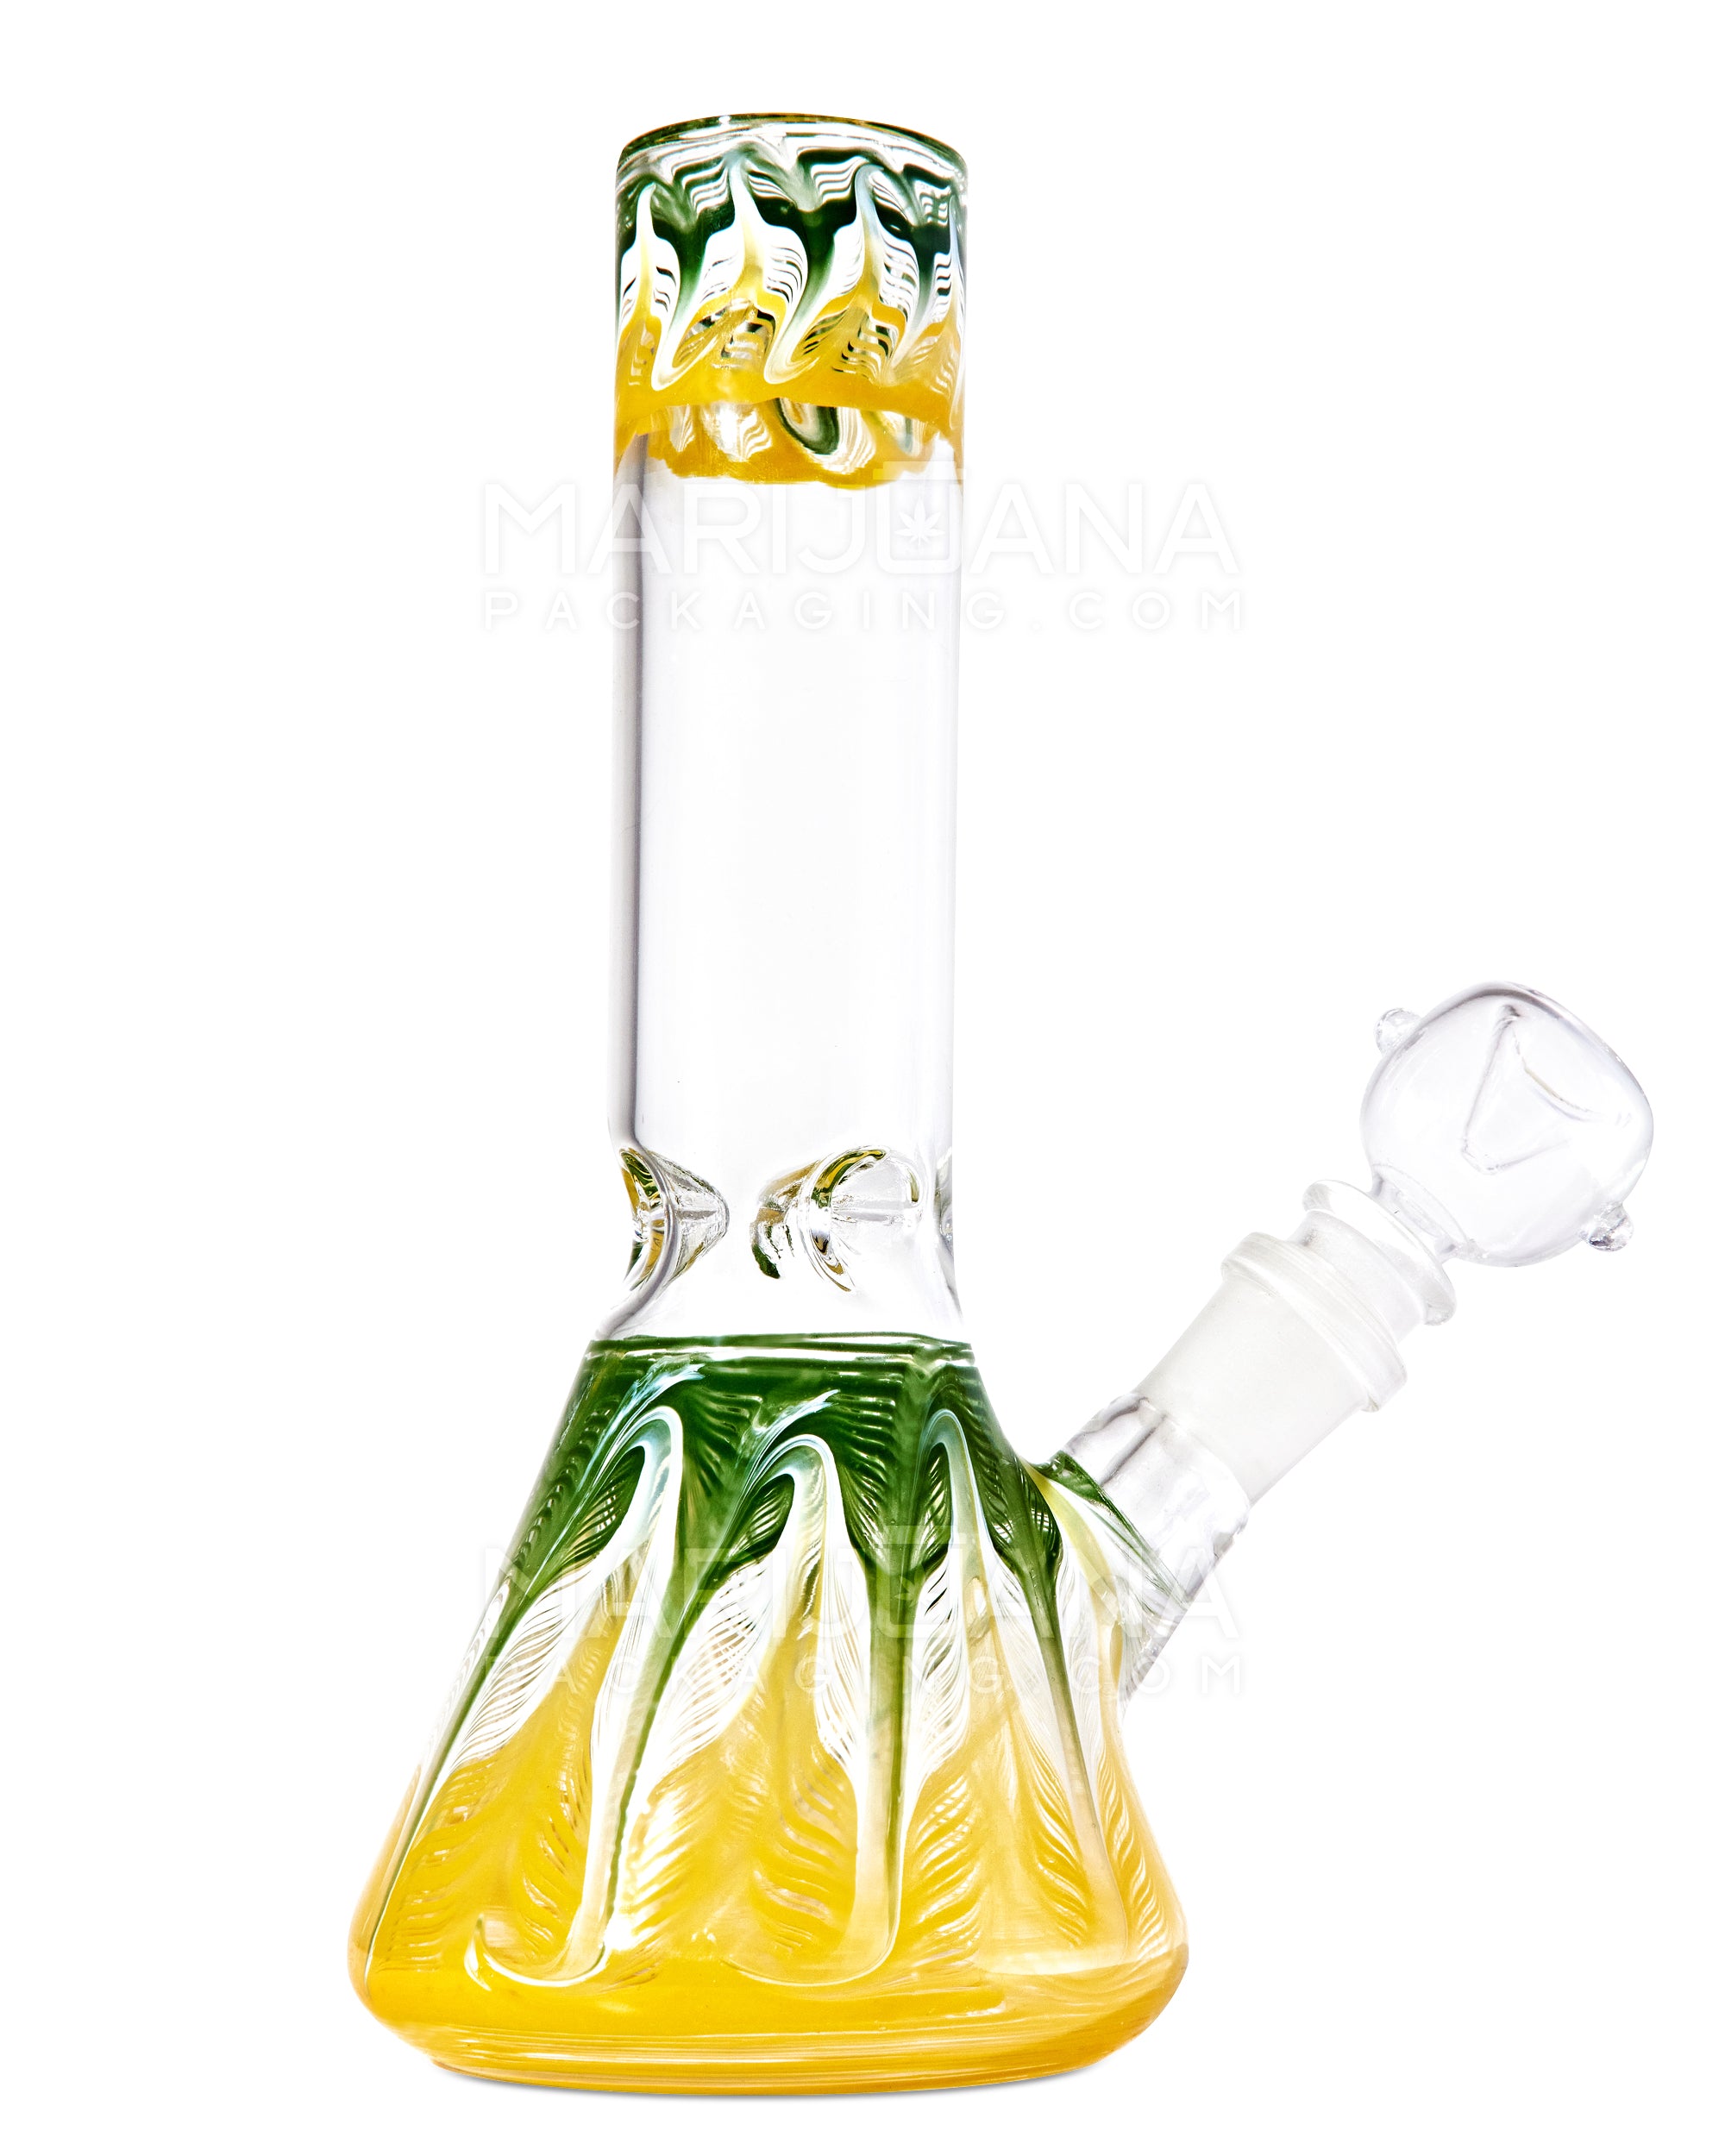 Straight Neck Raked Thick Glass Beaker Water Pipe w/ Ice Catcher | 8in Tall - 14mm Bowl - Assorted - 7